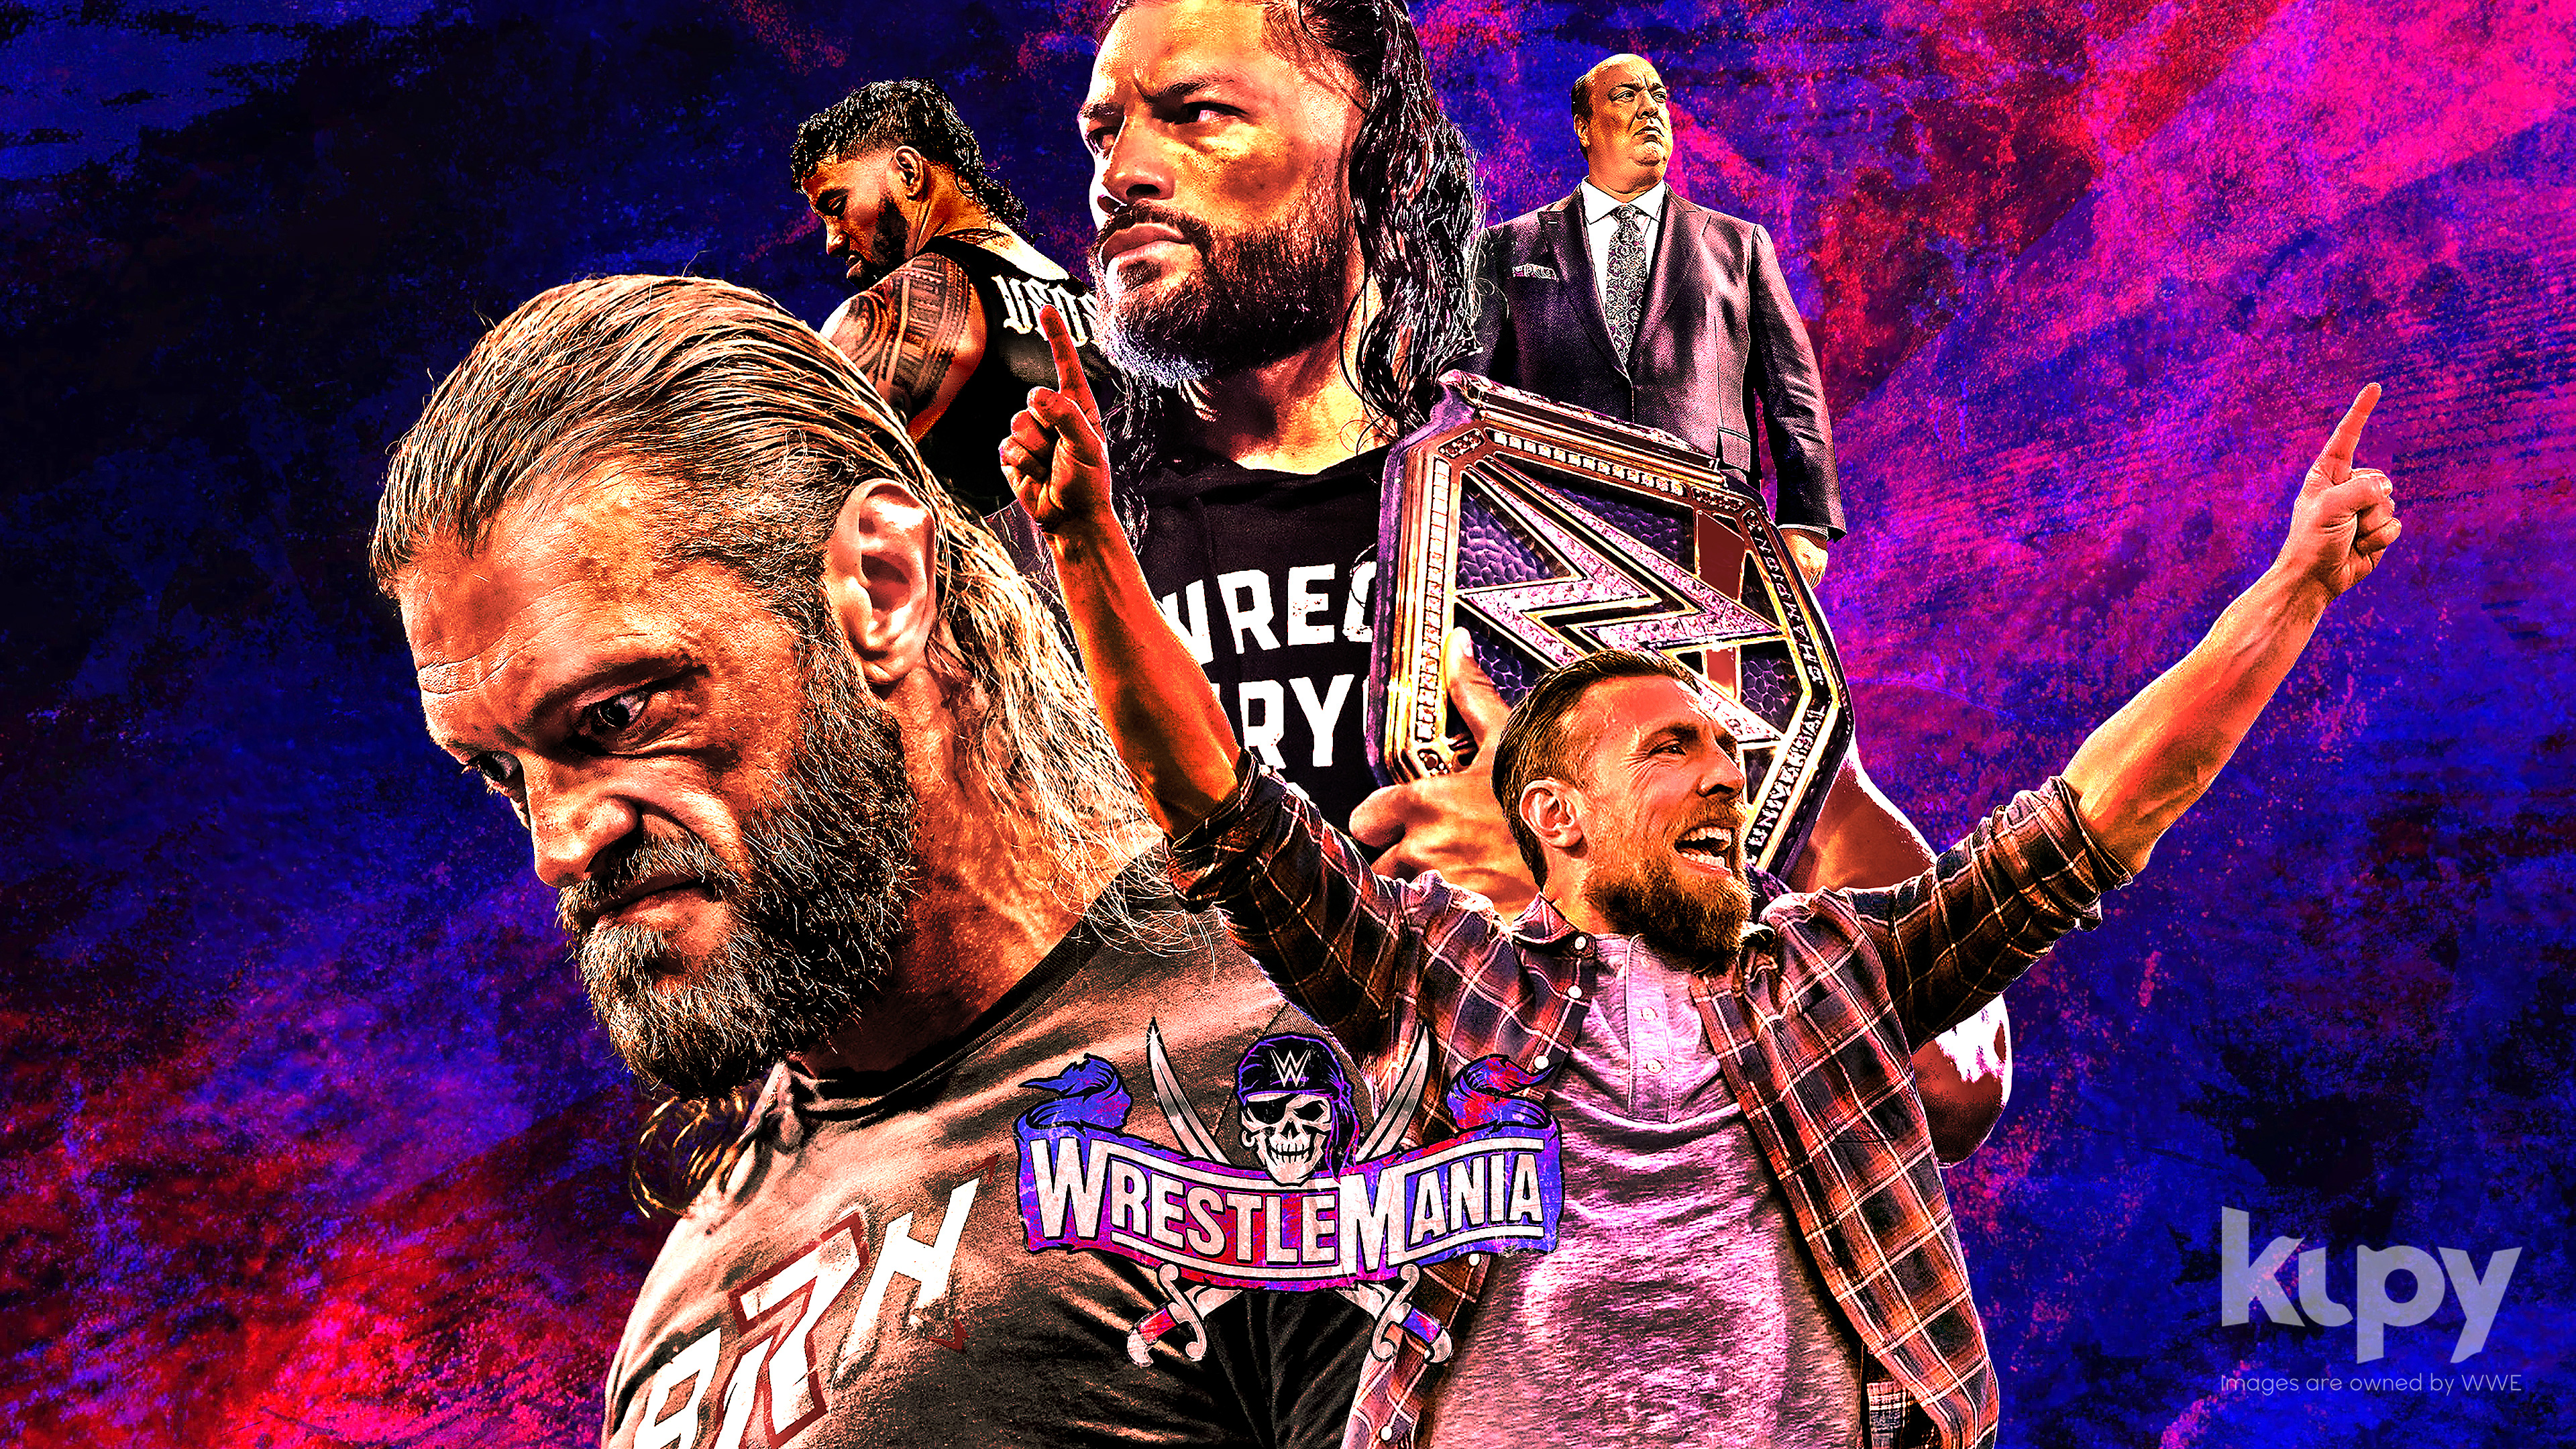 retina wallpaper Archives - Page 2 of 5 - Kupy Wrestling Wallpapers